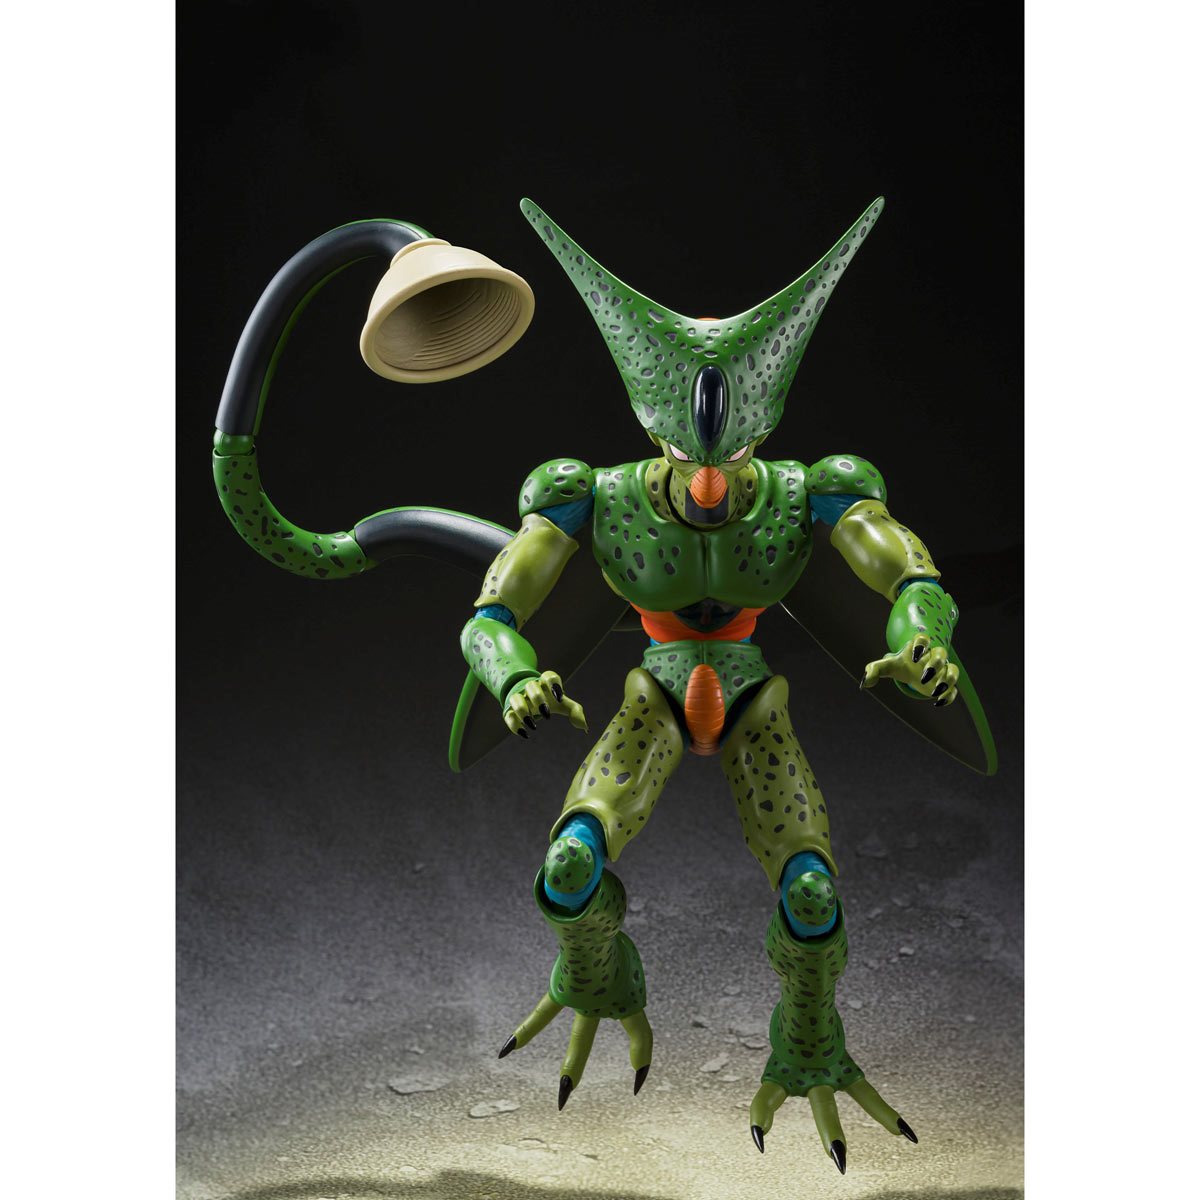 
                  
                    Dragon Ball Z Cell First Form S.H.Figuarts Action Figure - A highly detailed and articulated plastic figure of Cell in his First Form from Dragon Ball Z. Stands over 6 inches tall, featuring interchangeable hands, faces, and tail parts.
                  
                